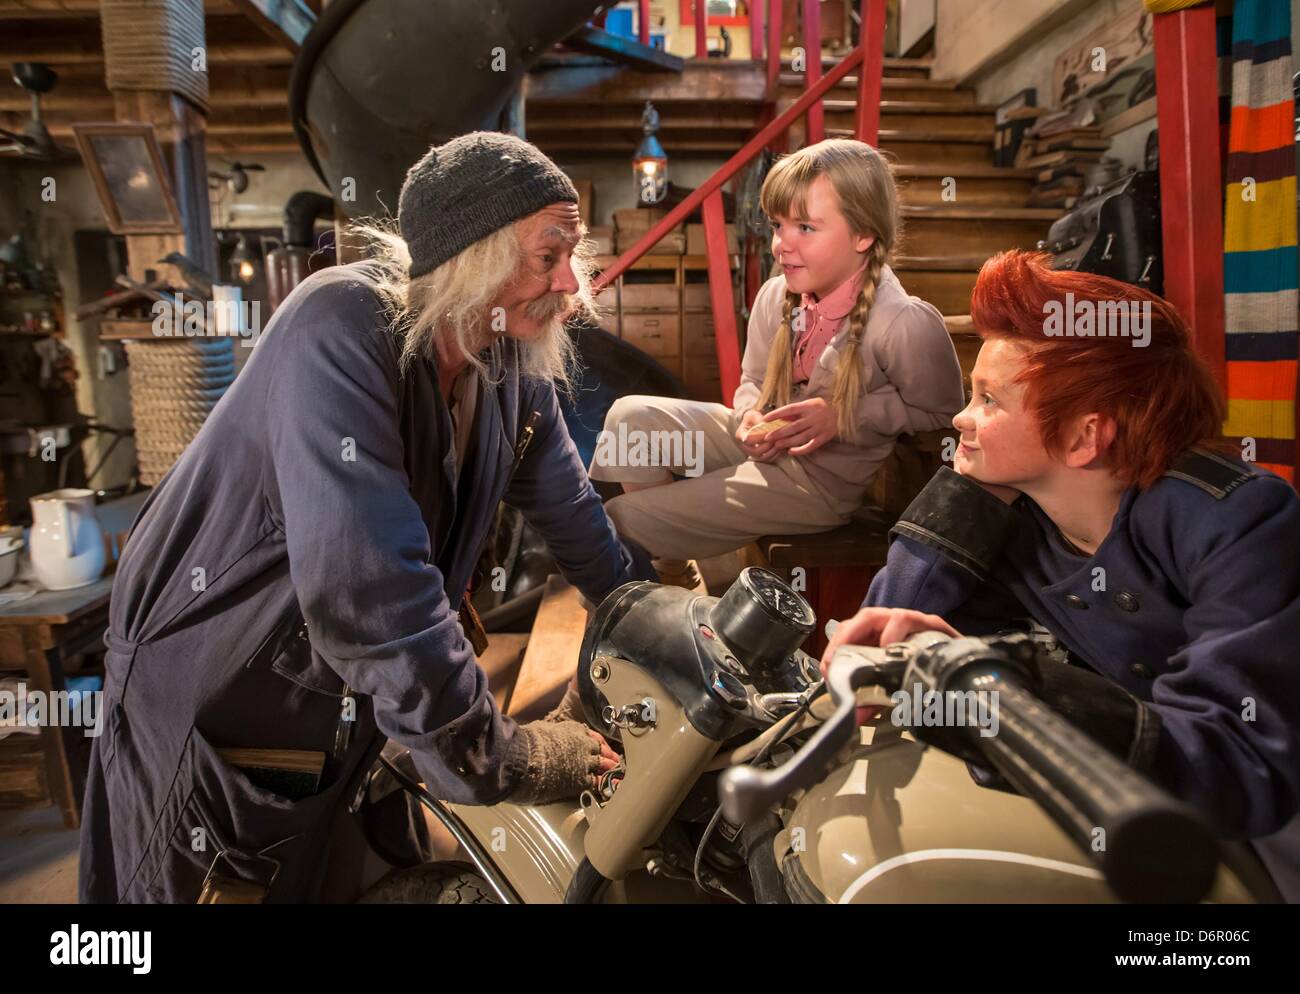 Actors ler Kristoffer Joner (Doktor Proktor, L), Emily Glaister (Lise, C) and Eilif H. Noraker (Bulle) talks on the movie set of the German-Norwegian co-production 'Dokto Proktors Pupspulver' (English translation Doctor Proctor's Fart Powder) in Erfurt, Germany, 22 April 2013. Jo Nesbos well-loved children's book about the crazy professor Doctor Proctor will be filmed in Erfurt until 07 May 2013 and then in Oslo, Norway. It should come to cinemas at the beginning of next year. Photo: MICHAEL REICHEL Stock Photo